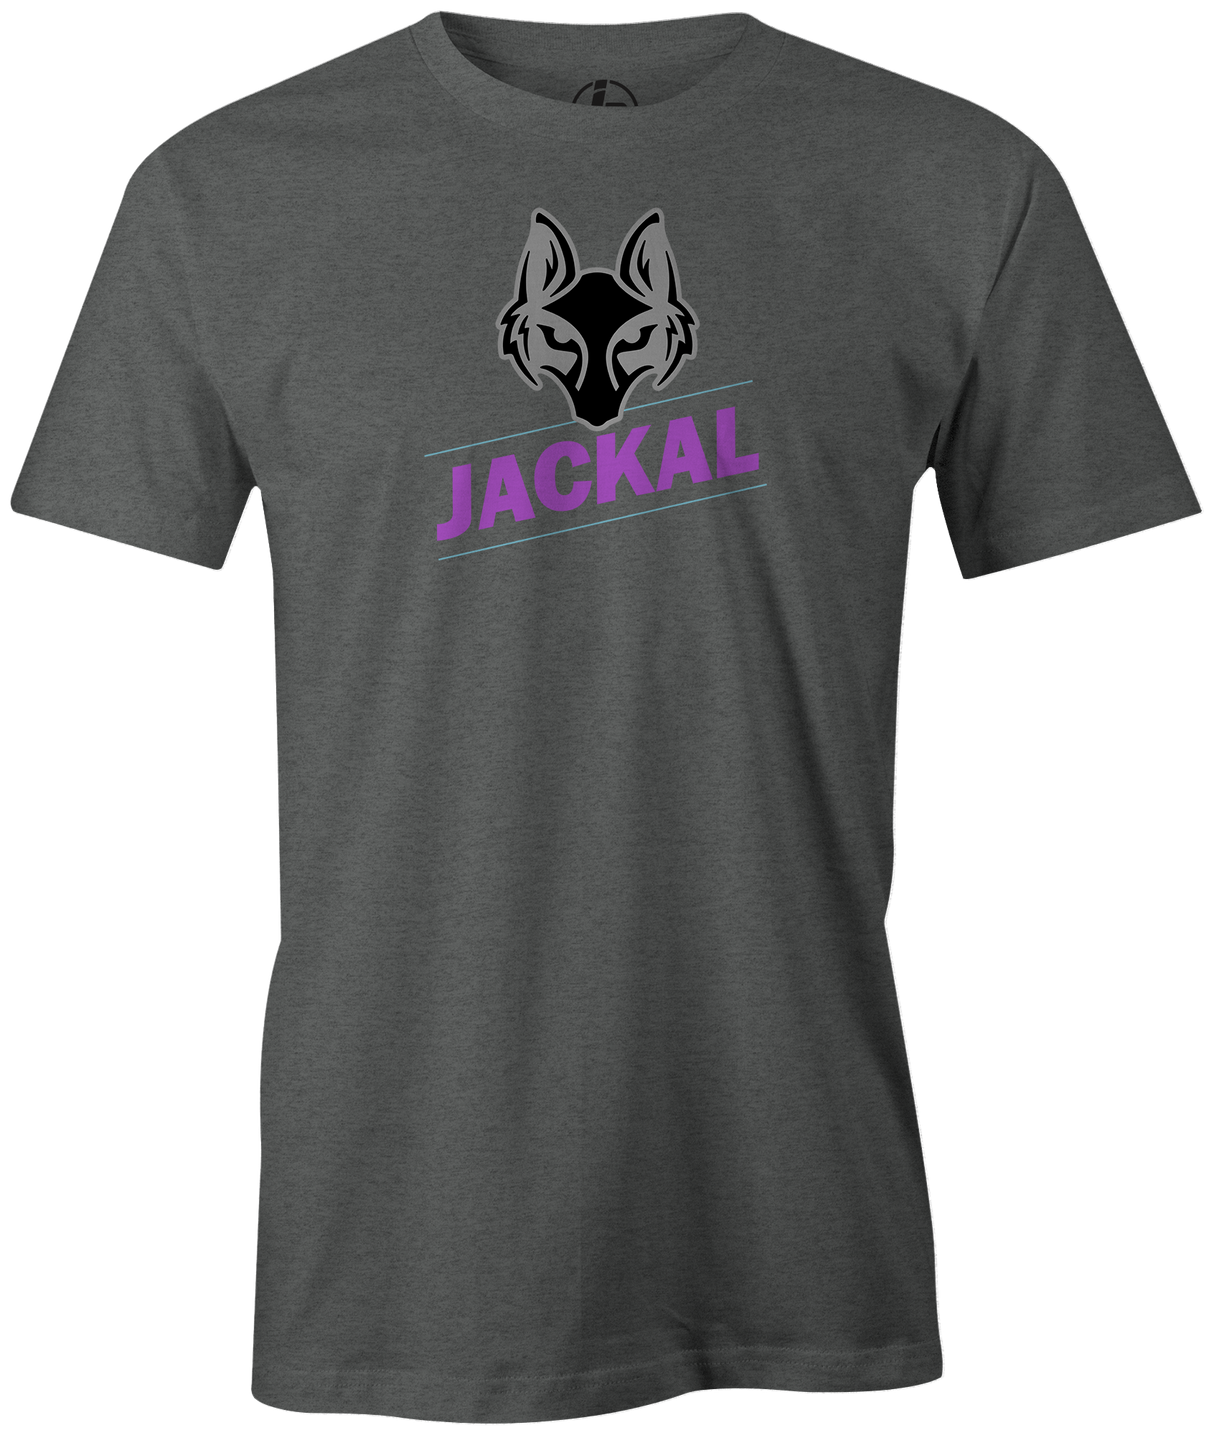 This shirt features the 2022 Motiv Jackal logo found on the new Jackal Pixel Spare ball. If you love Motiv, this Jackal shirt is a must for your collection! Gift Sale Large Selection of Discount League Tournament Bowling Shirts tees jerseys ej tackett pba Jackal bowling ball review pwba